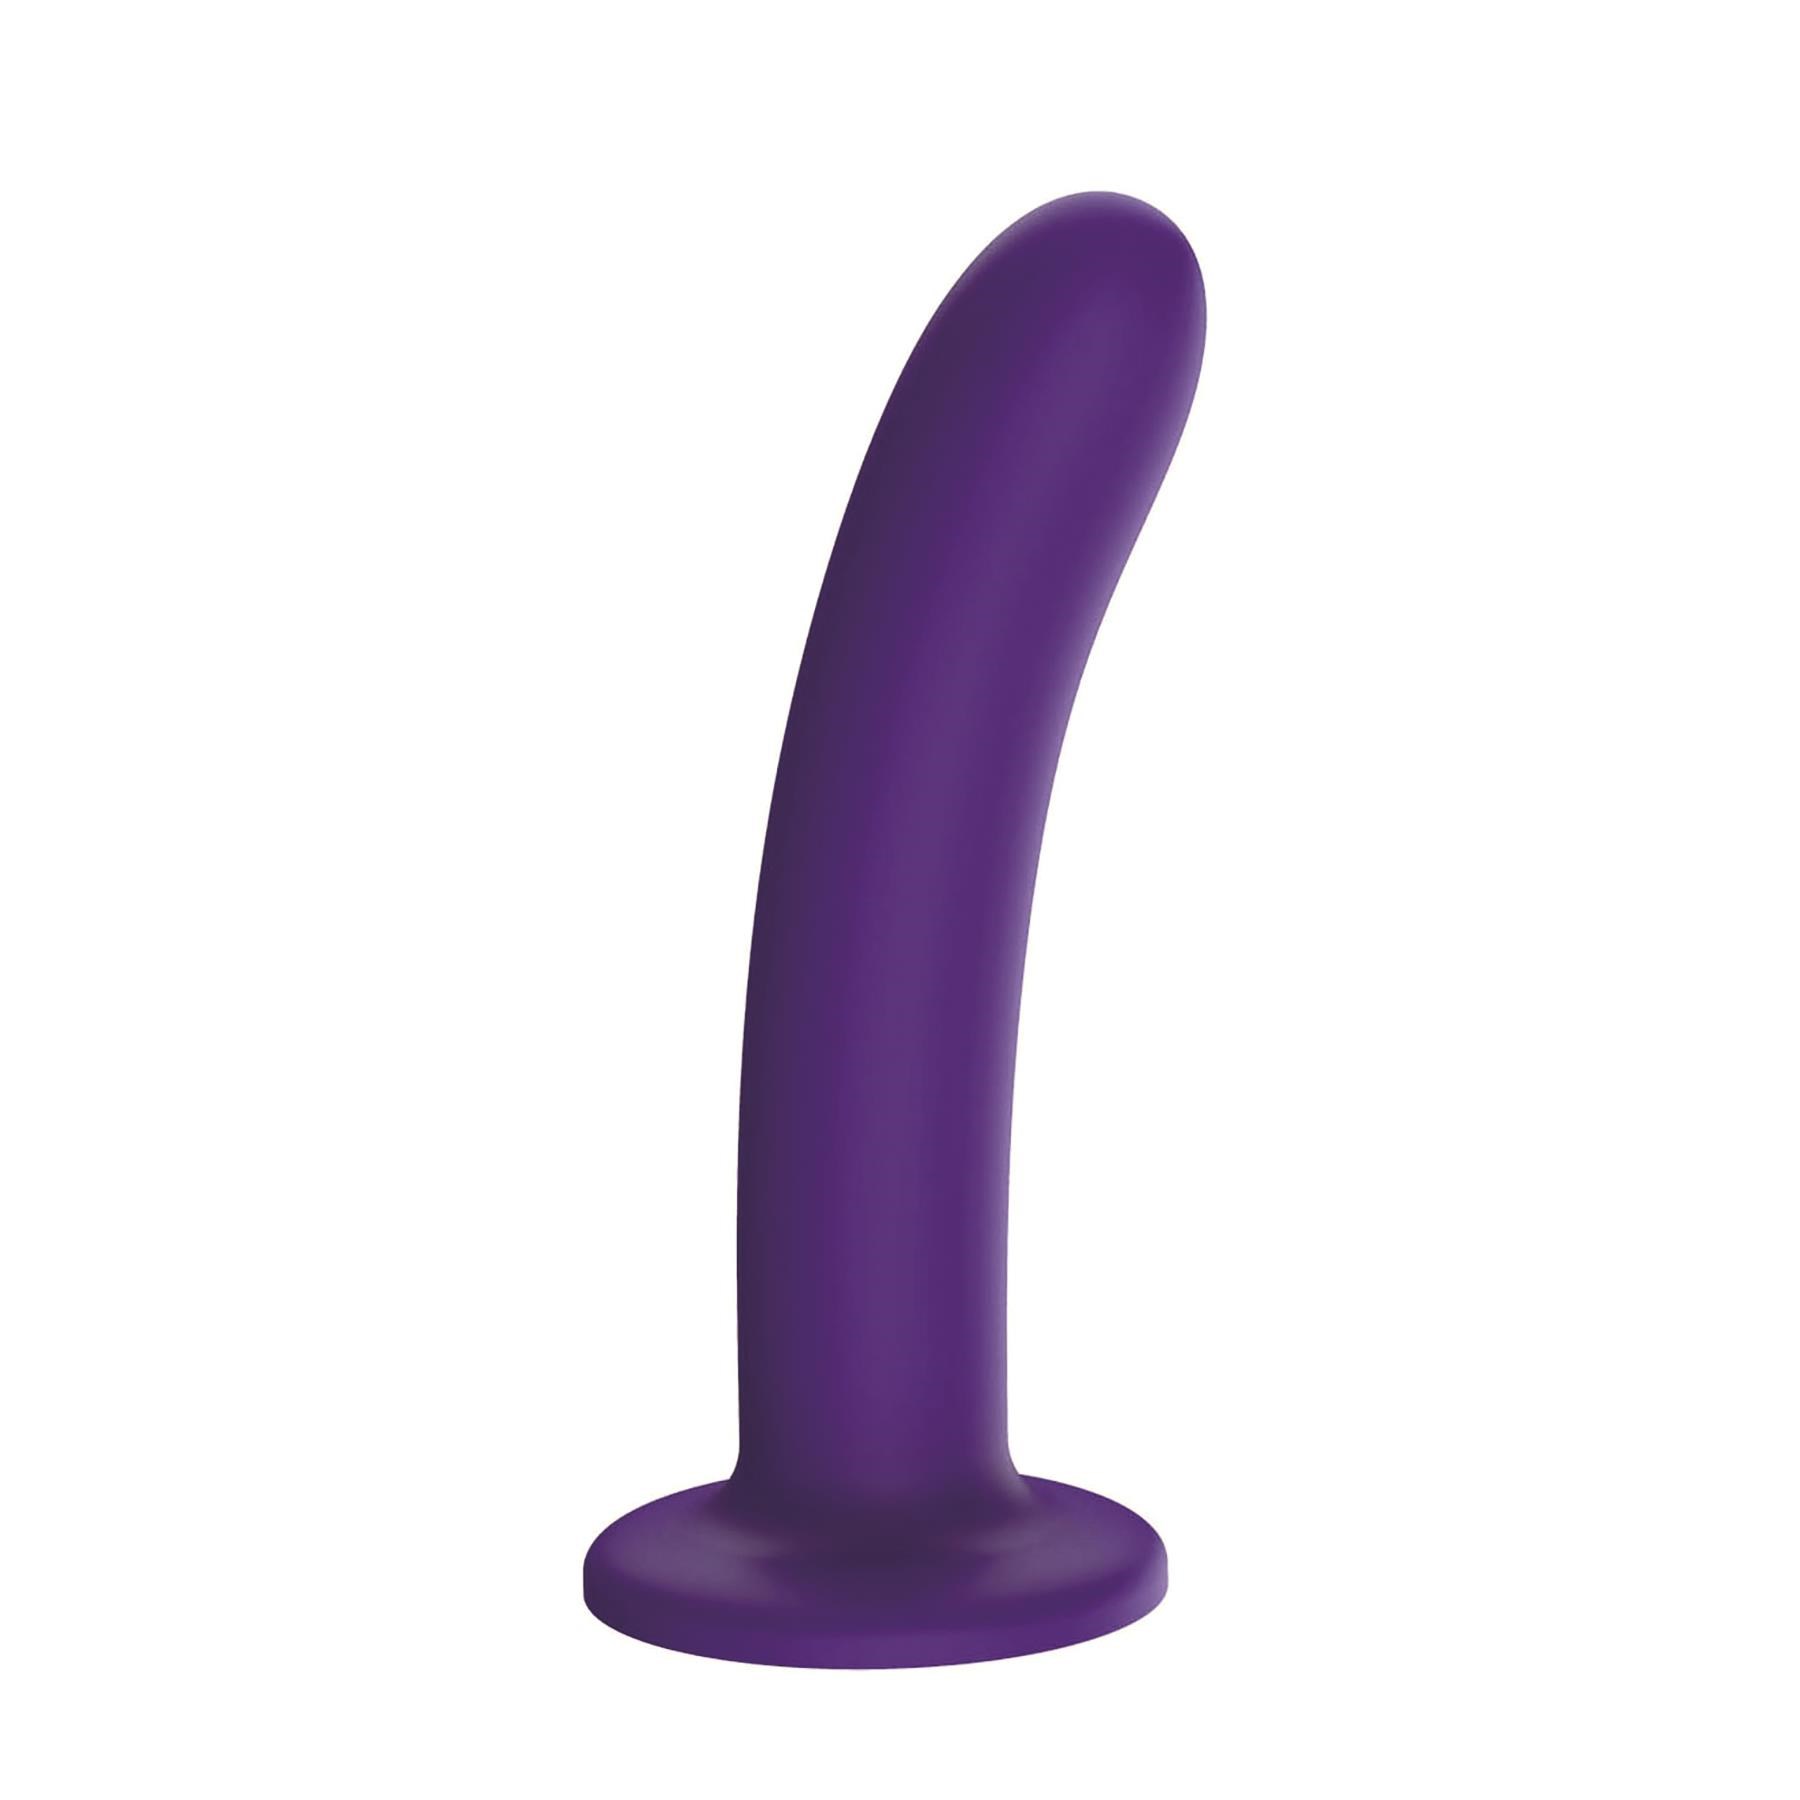 Wild Secrets Desire Silicone Dildo with Suction Cup - Product Shot #1